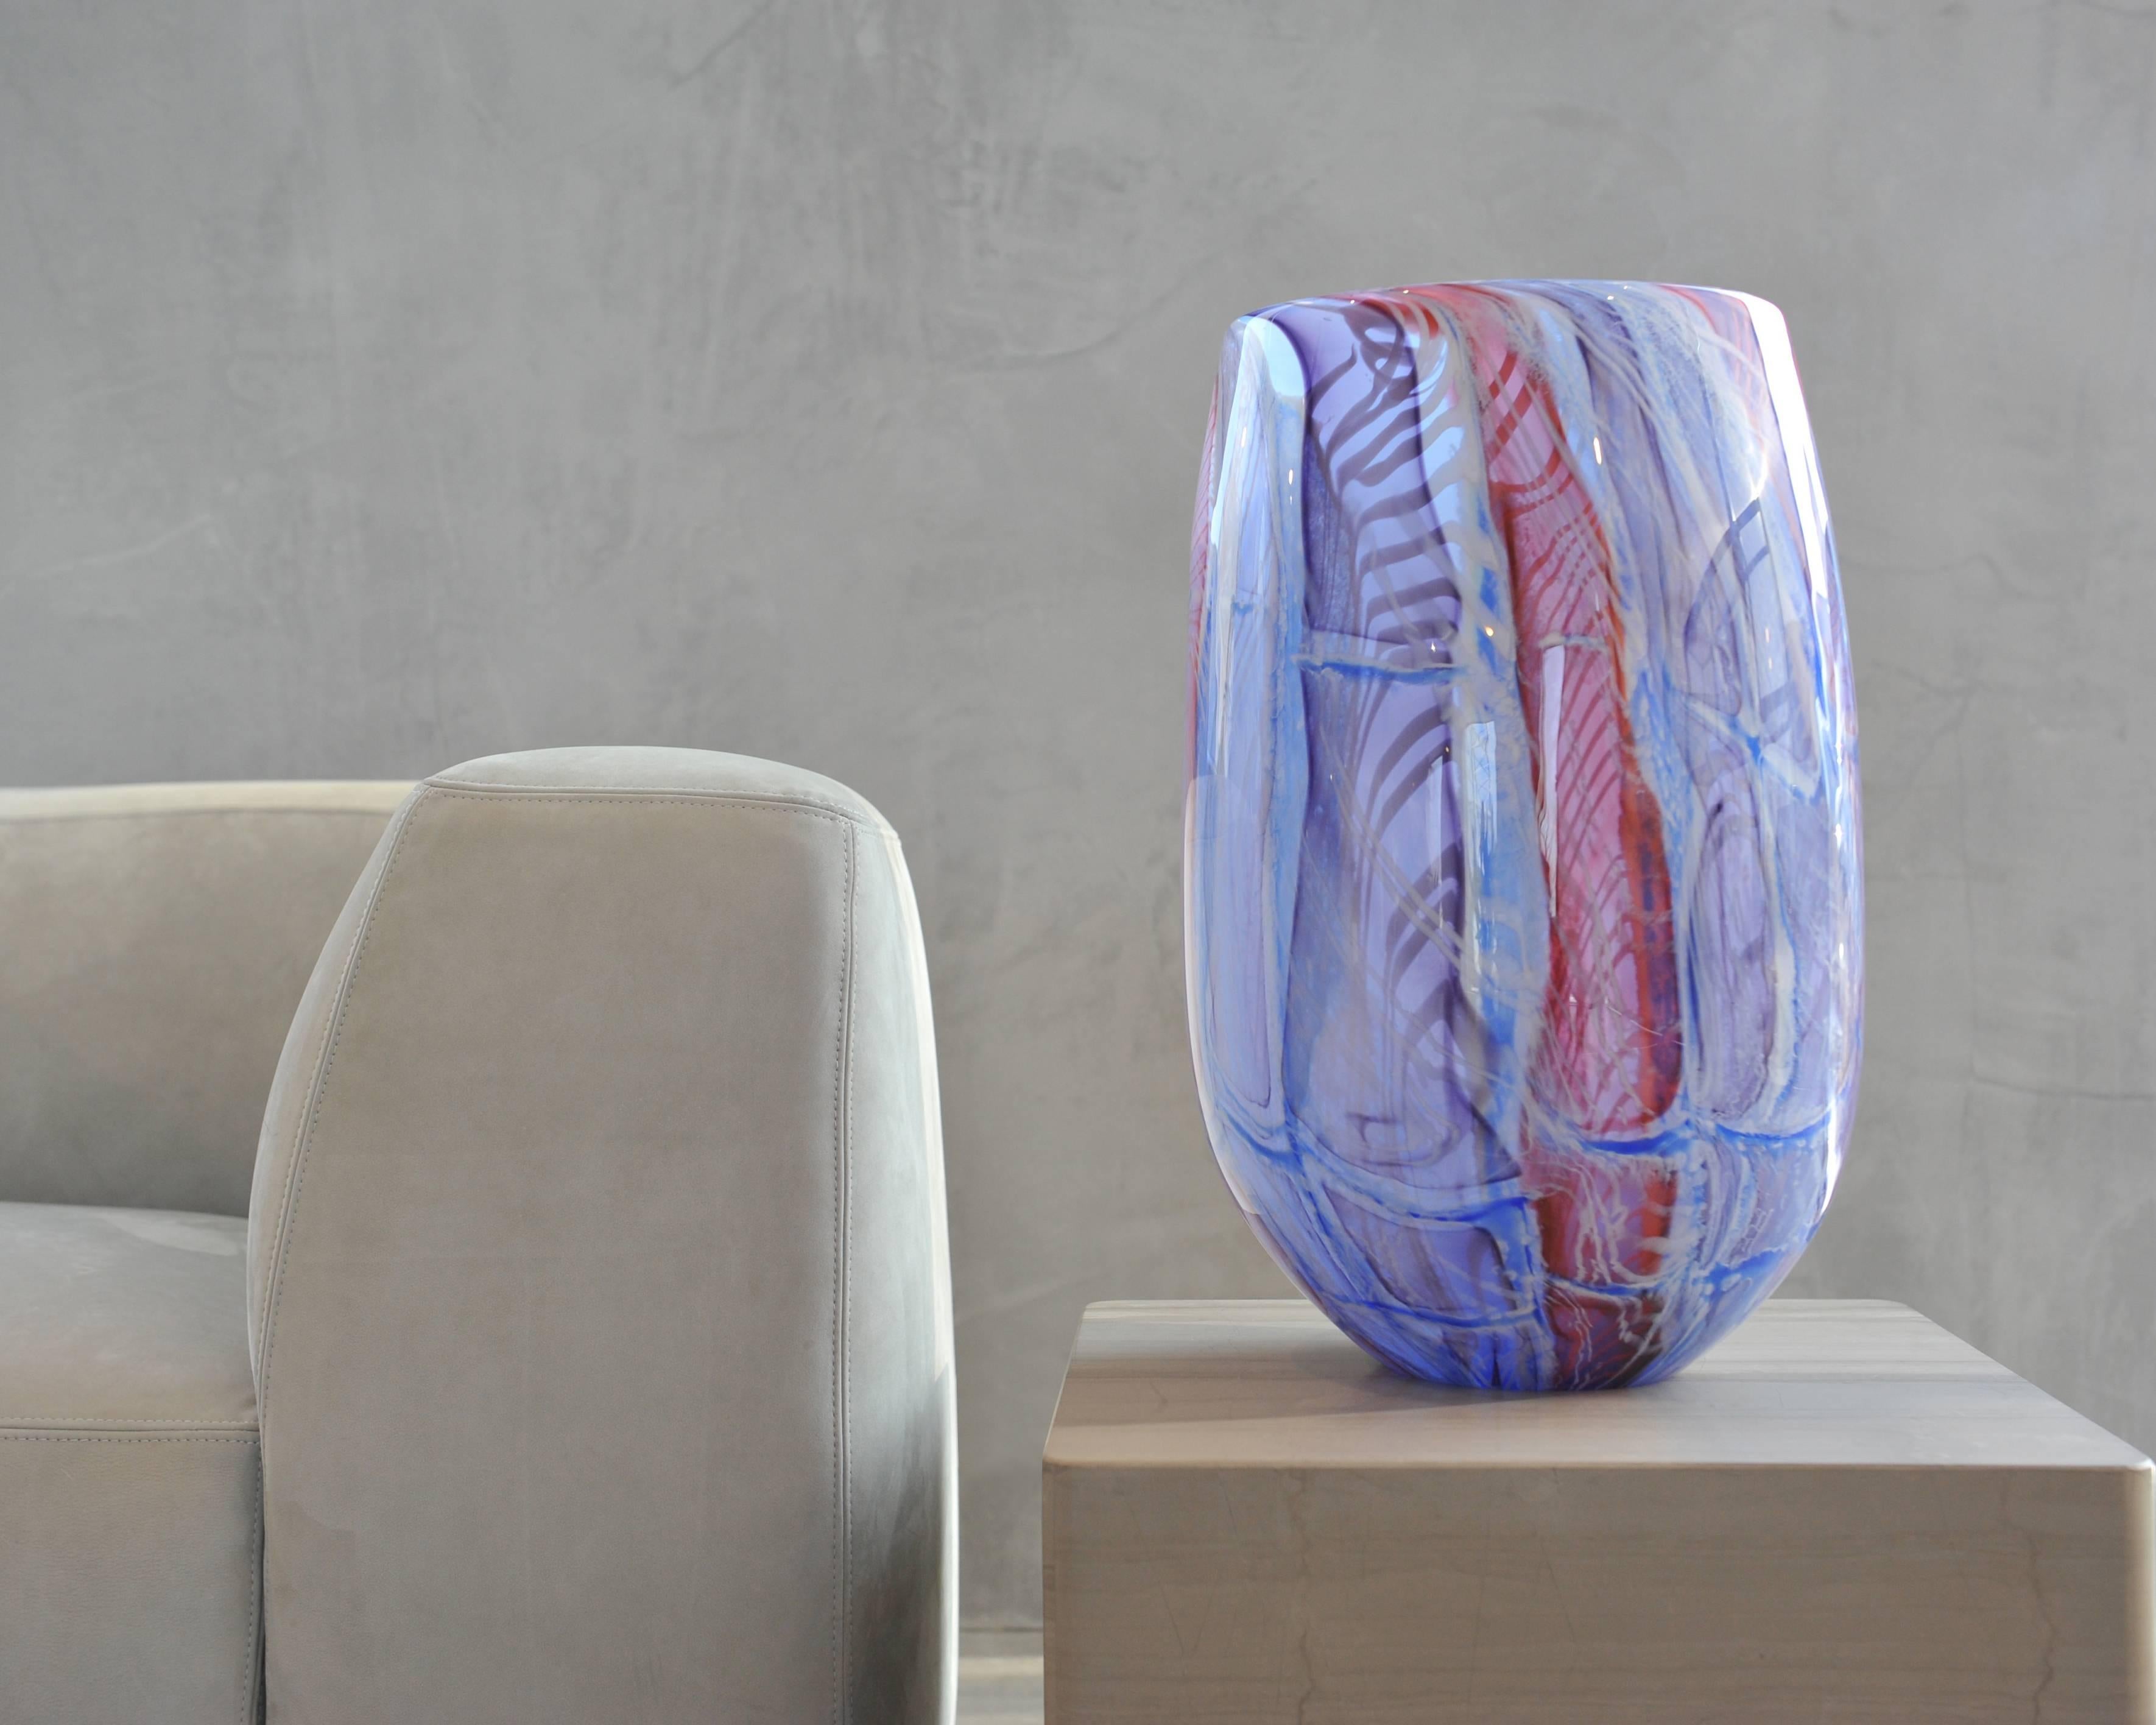 This beautiful blown glass tall vase created by glass artist Richard Price, is a jewel for the interior. Translucent color patterns are playing the eye. It is a unique piece that comes with a Certificate of Authenticity. Although it's a large vase,